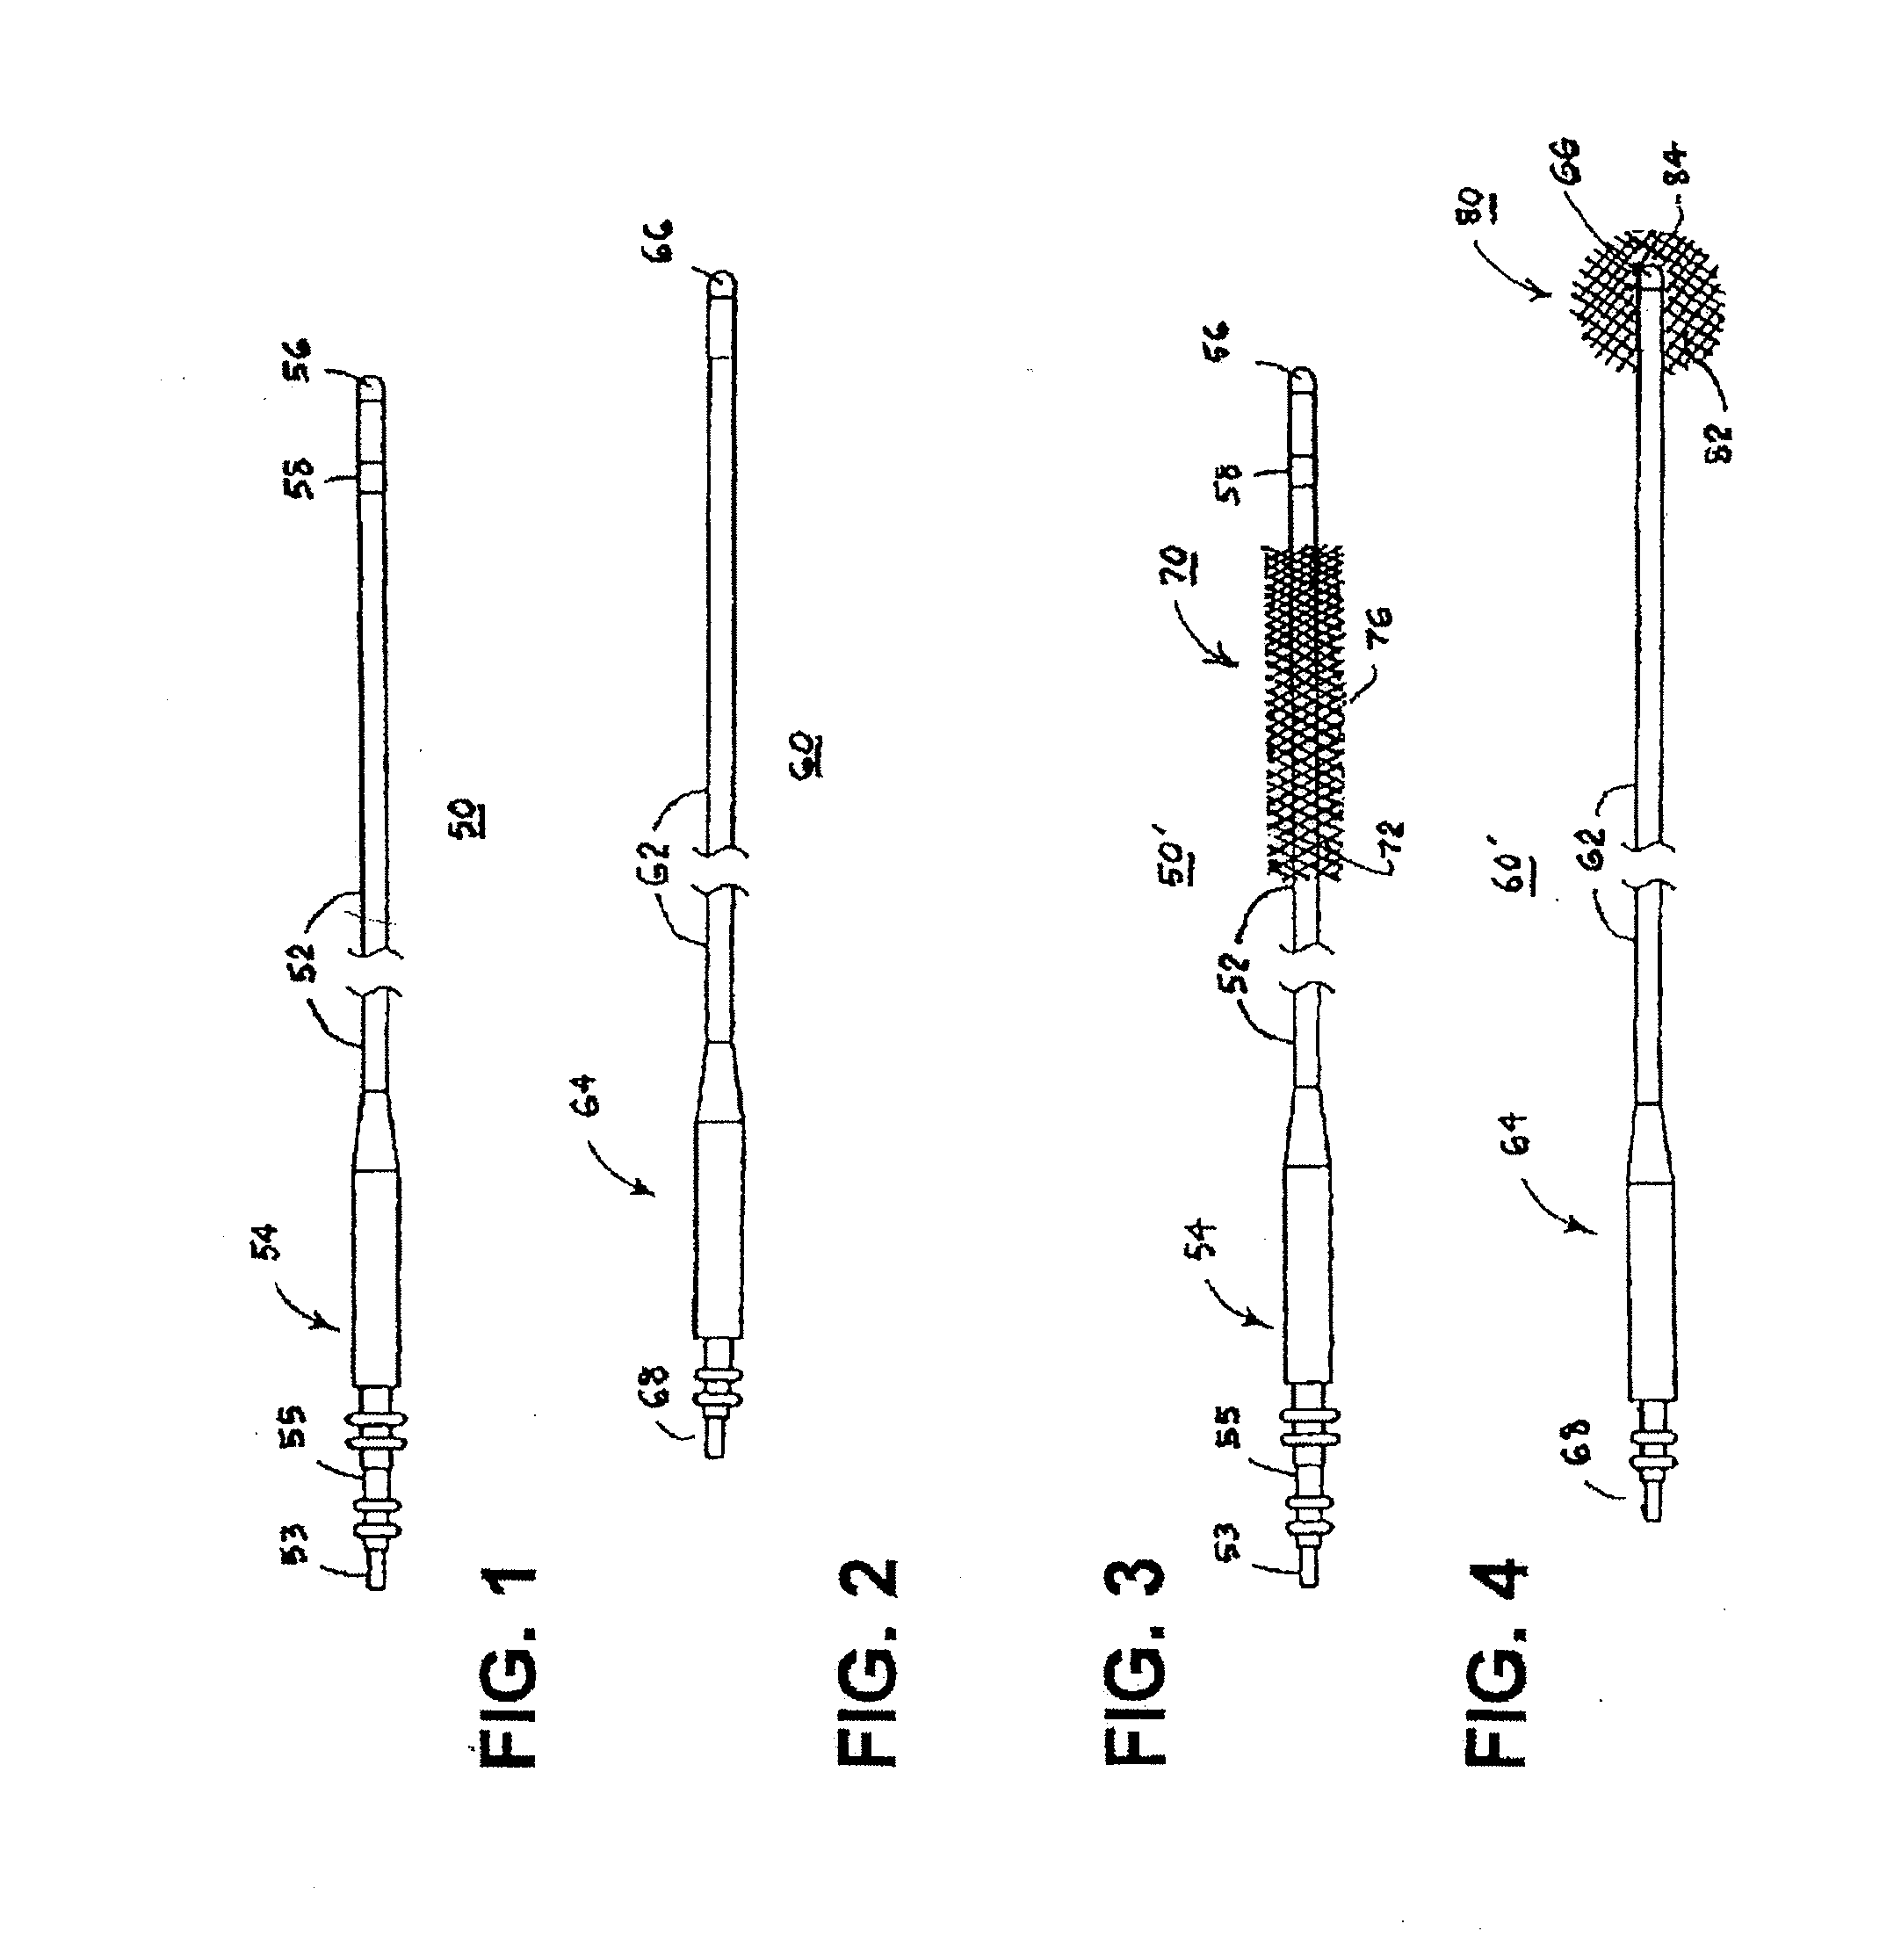 Systems and Methods for Implanting Tissue Stimulation Electrodes in the Pelvic Region